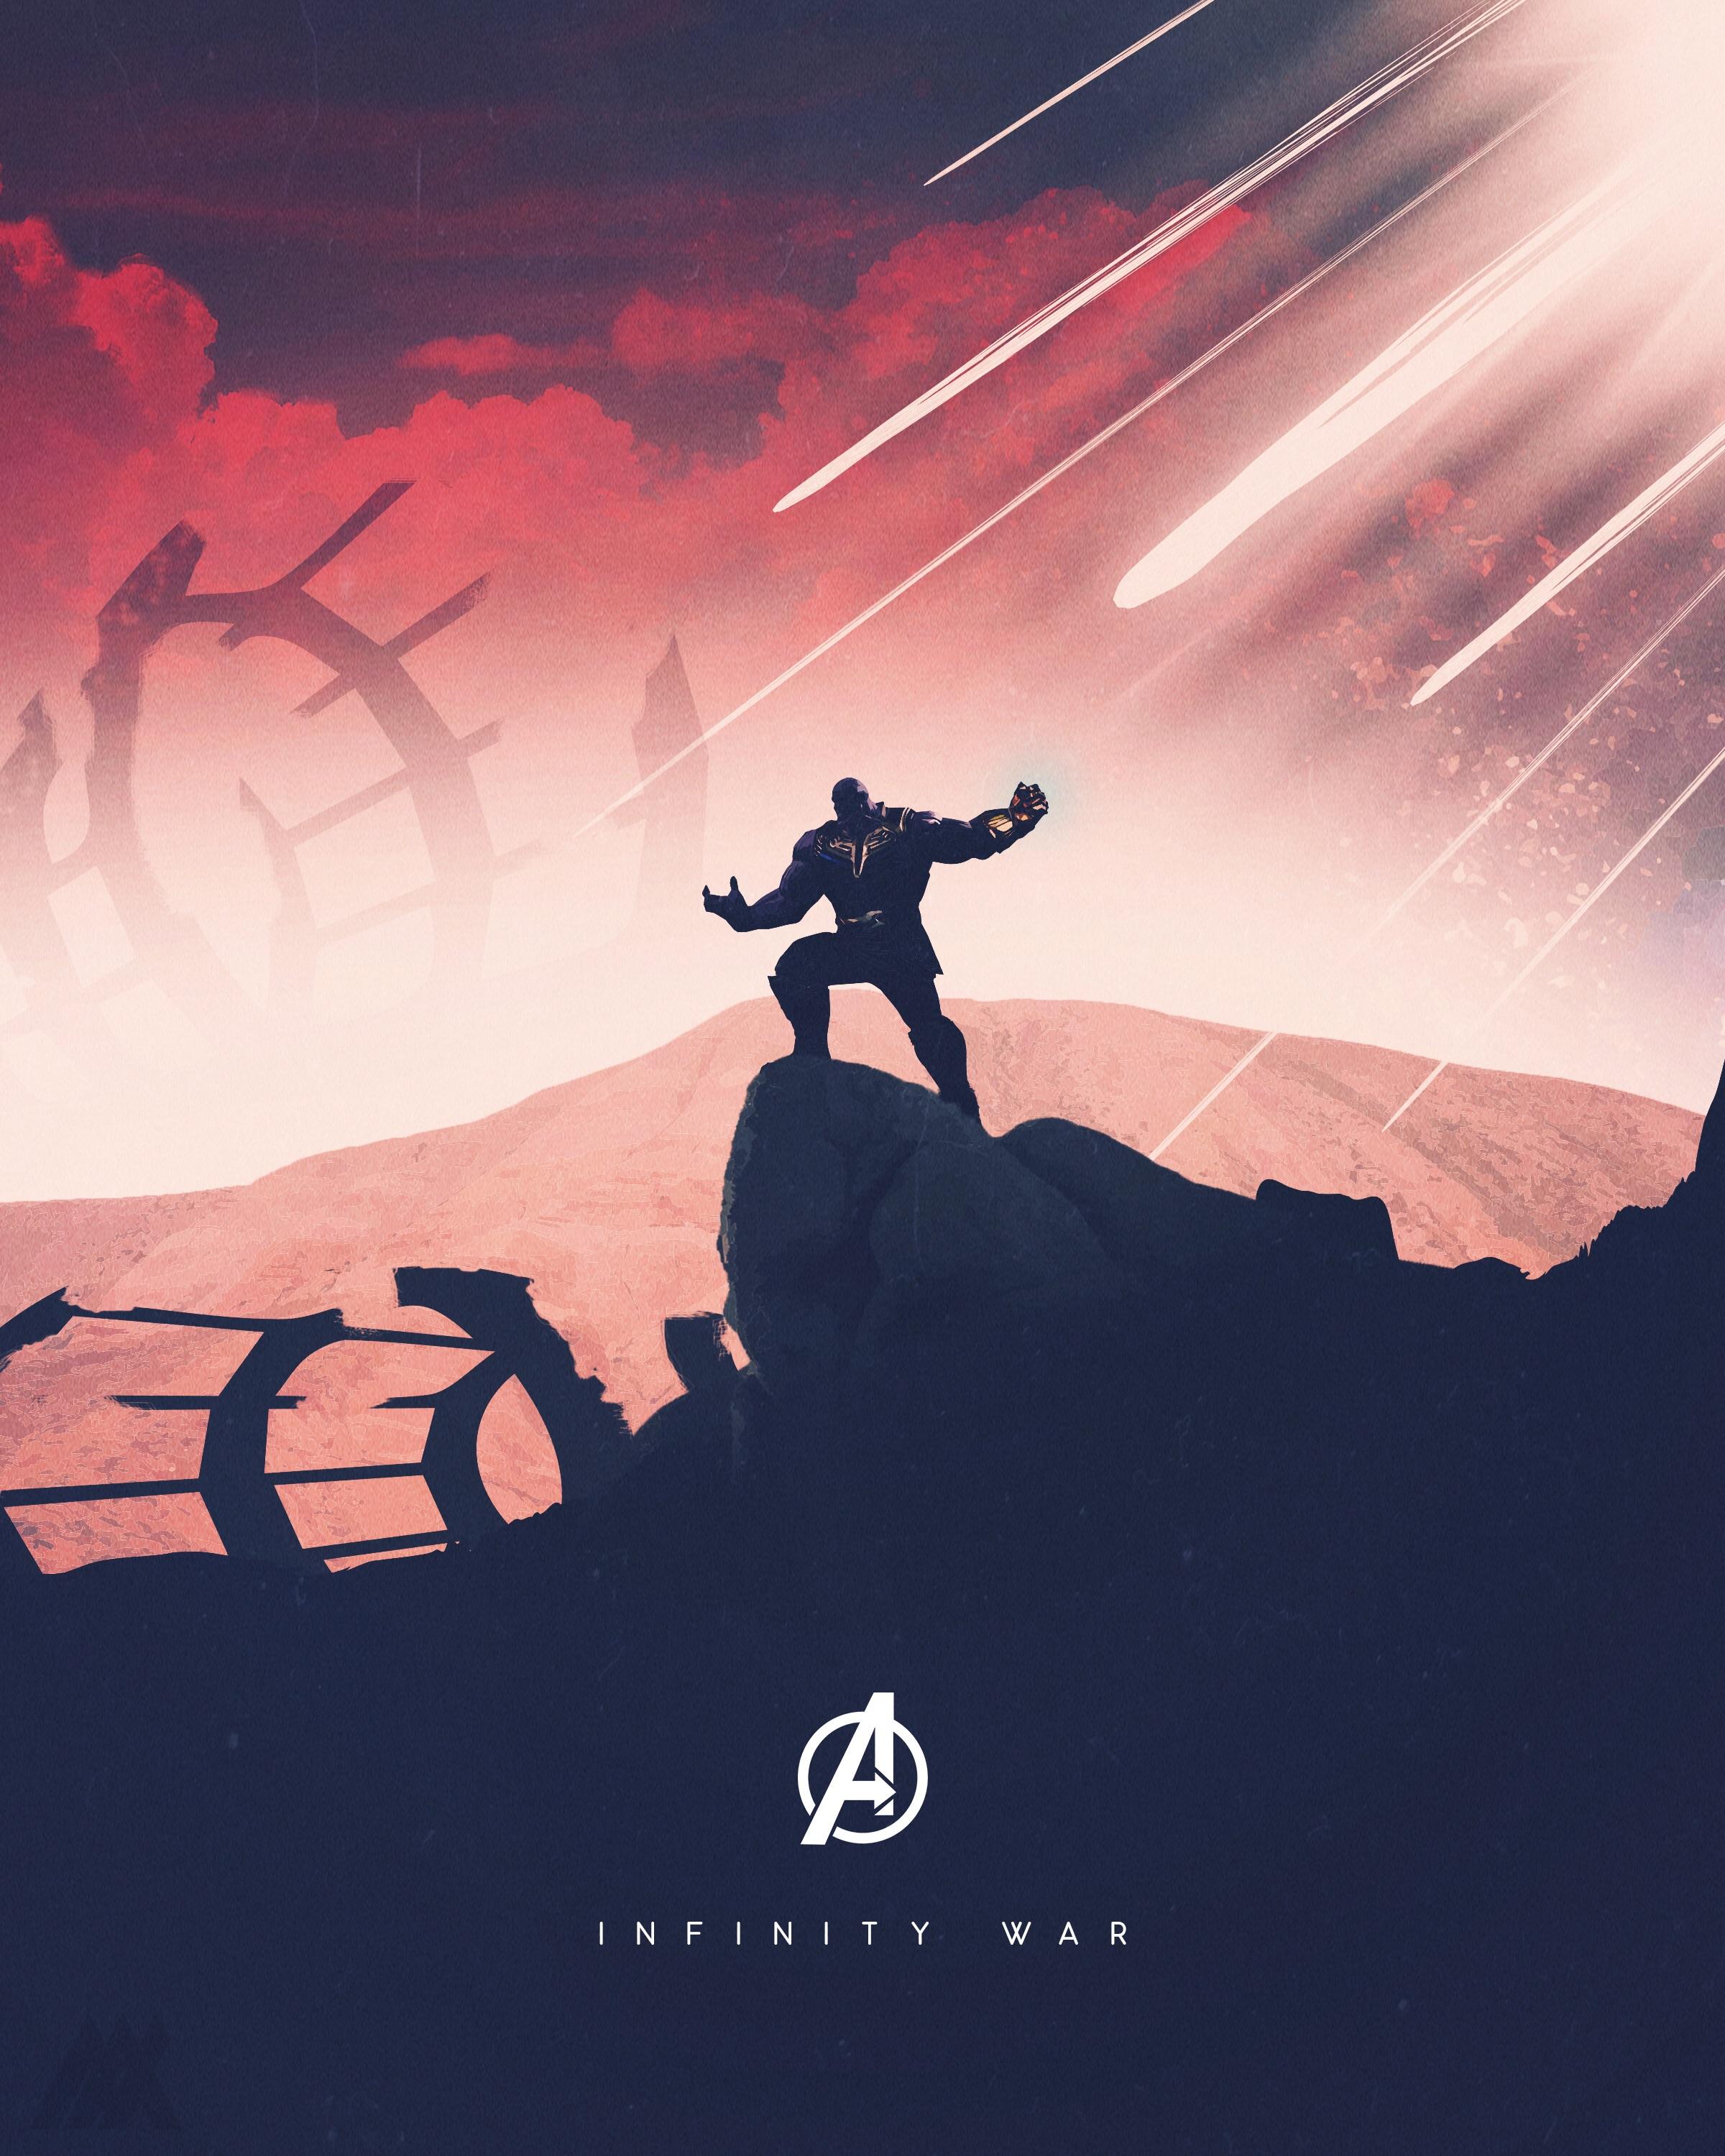 Wallpaper Thanos, Titian, Immortal, Avengers: Infinity War, HD, Creative Graphics / Editor's Picks,. Wallpaper for iPhone, Android, Mobile and Desktop